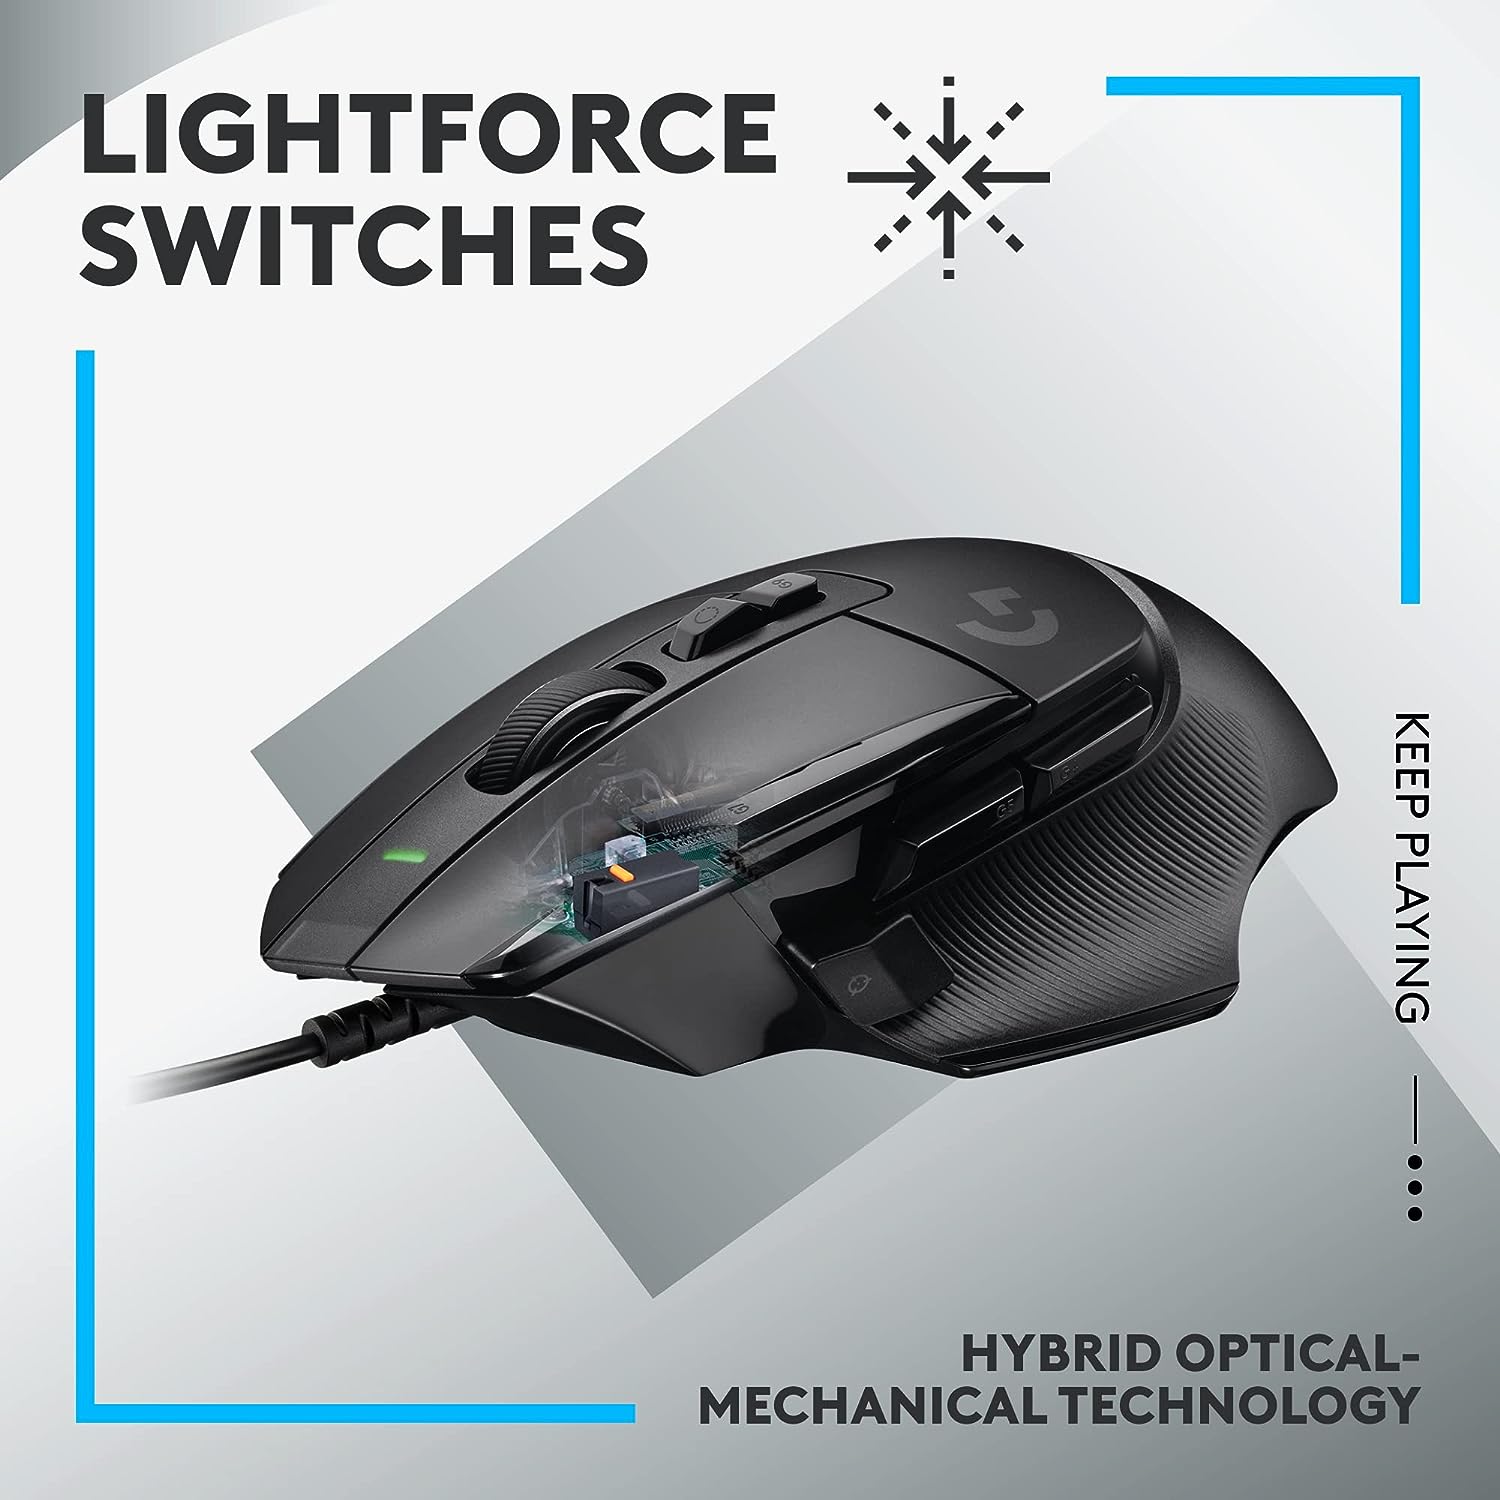 Logitech G502 HERO High Performance Wired Gaming Mouse, HERO 25K Sensor, 25,600 DPI, RGB, Adjustable Weights, 11 Programmable Buttons, On-Board Memory, PC / Mac